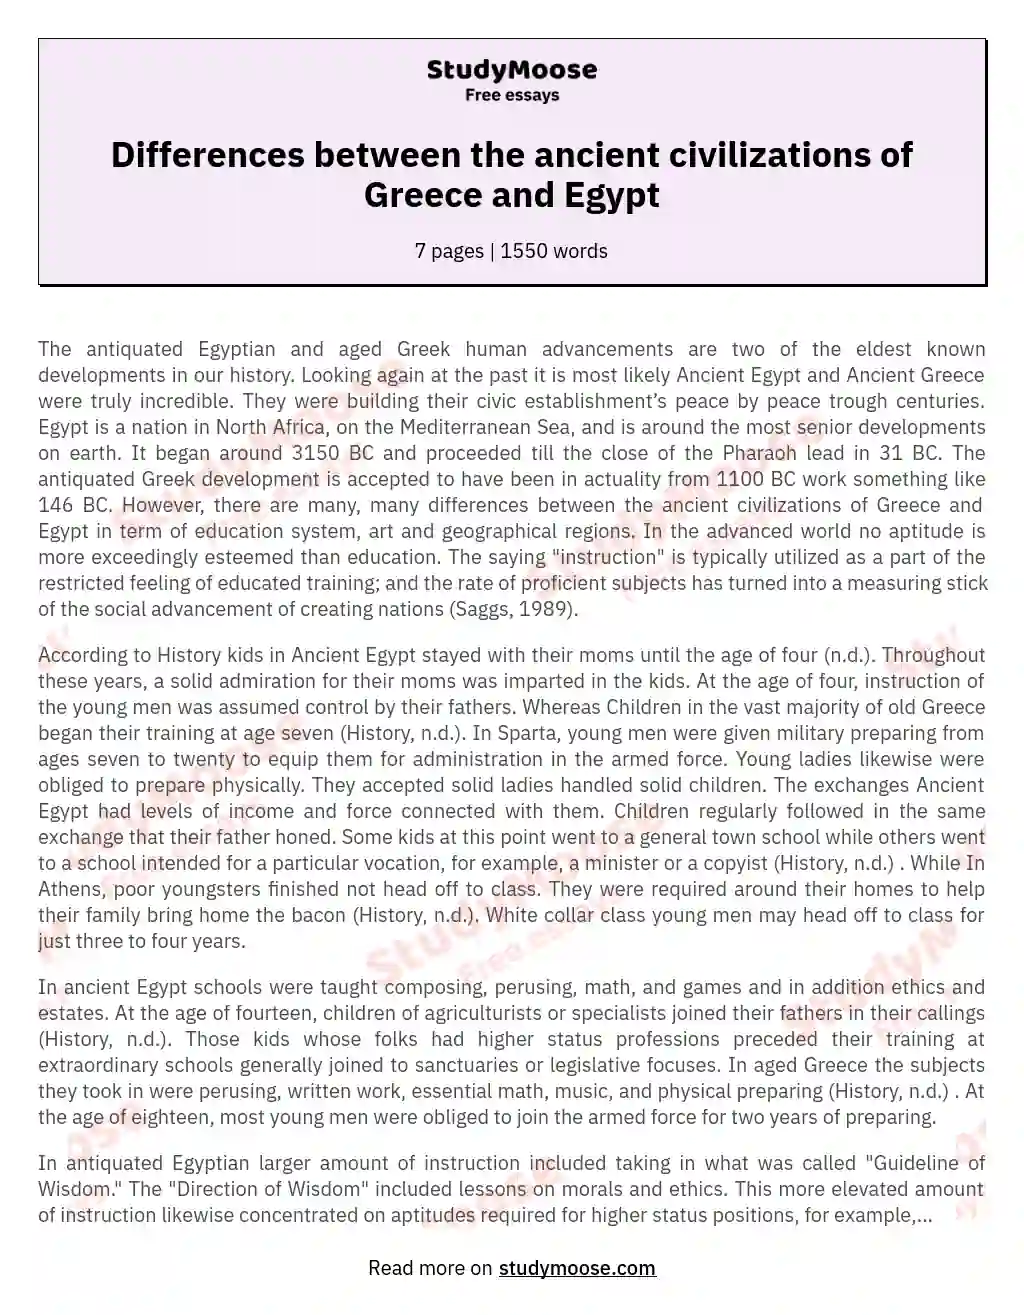 Differences between the ancient civilizations of Greece and Egypt essay